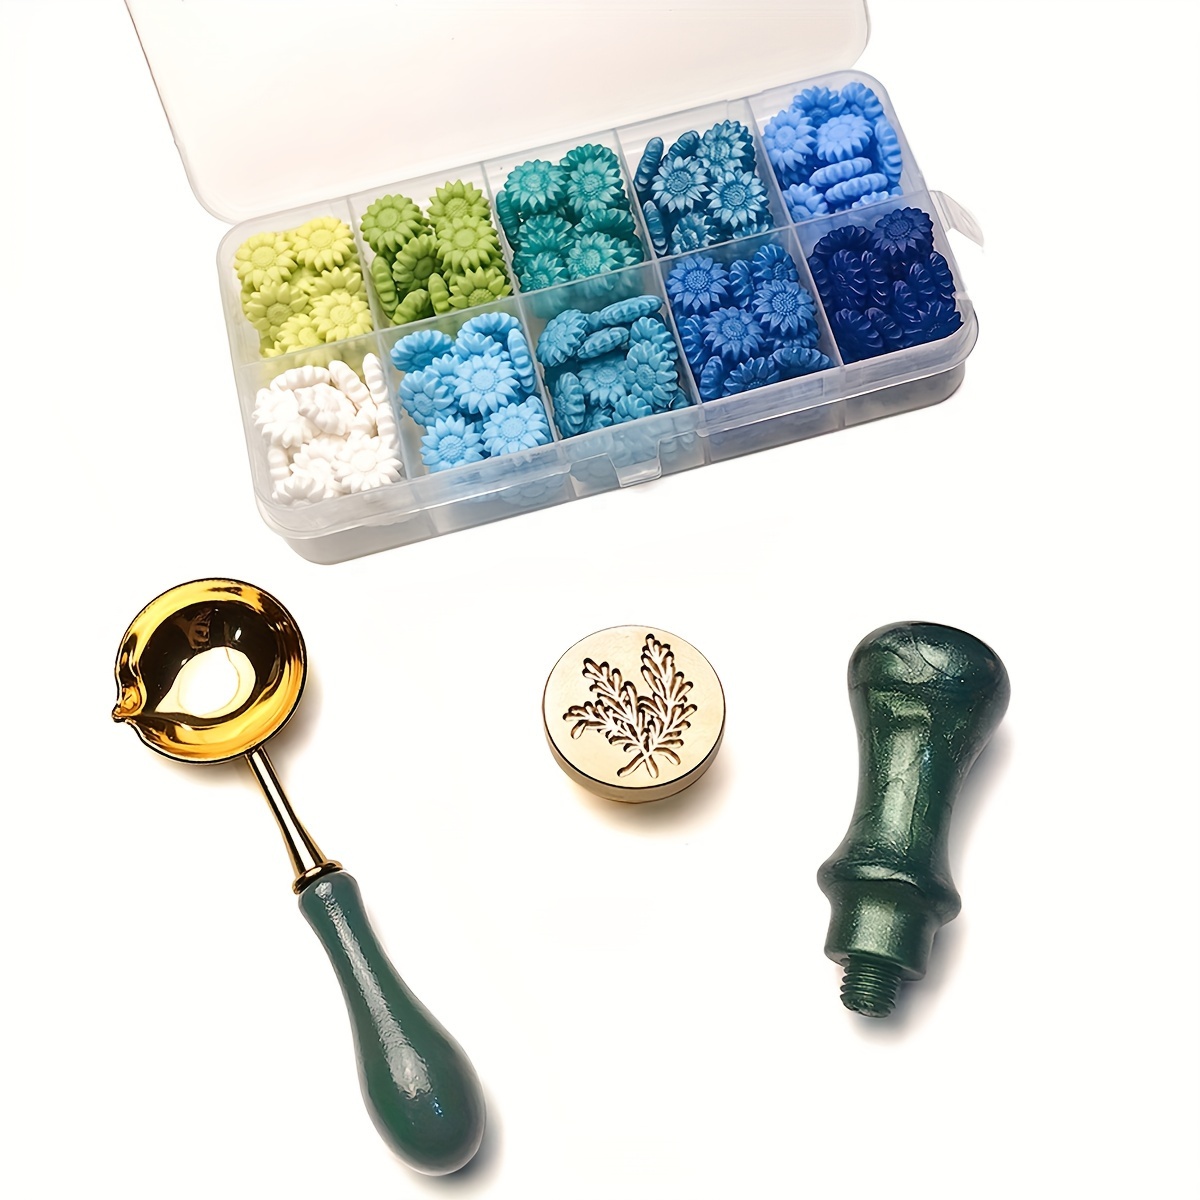 Wax Seal Stamp Set, Fire Paint Stamp Sealing Wax Kit, Diy Craft Supplies,  With Spoon Handle Candle, Sunflower Mat Board, Purple Spoon Purple Handle,  Handmade Accessories, For Gift Wrapping, Wine Package, Envelope